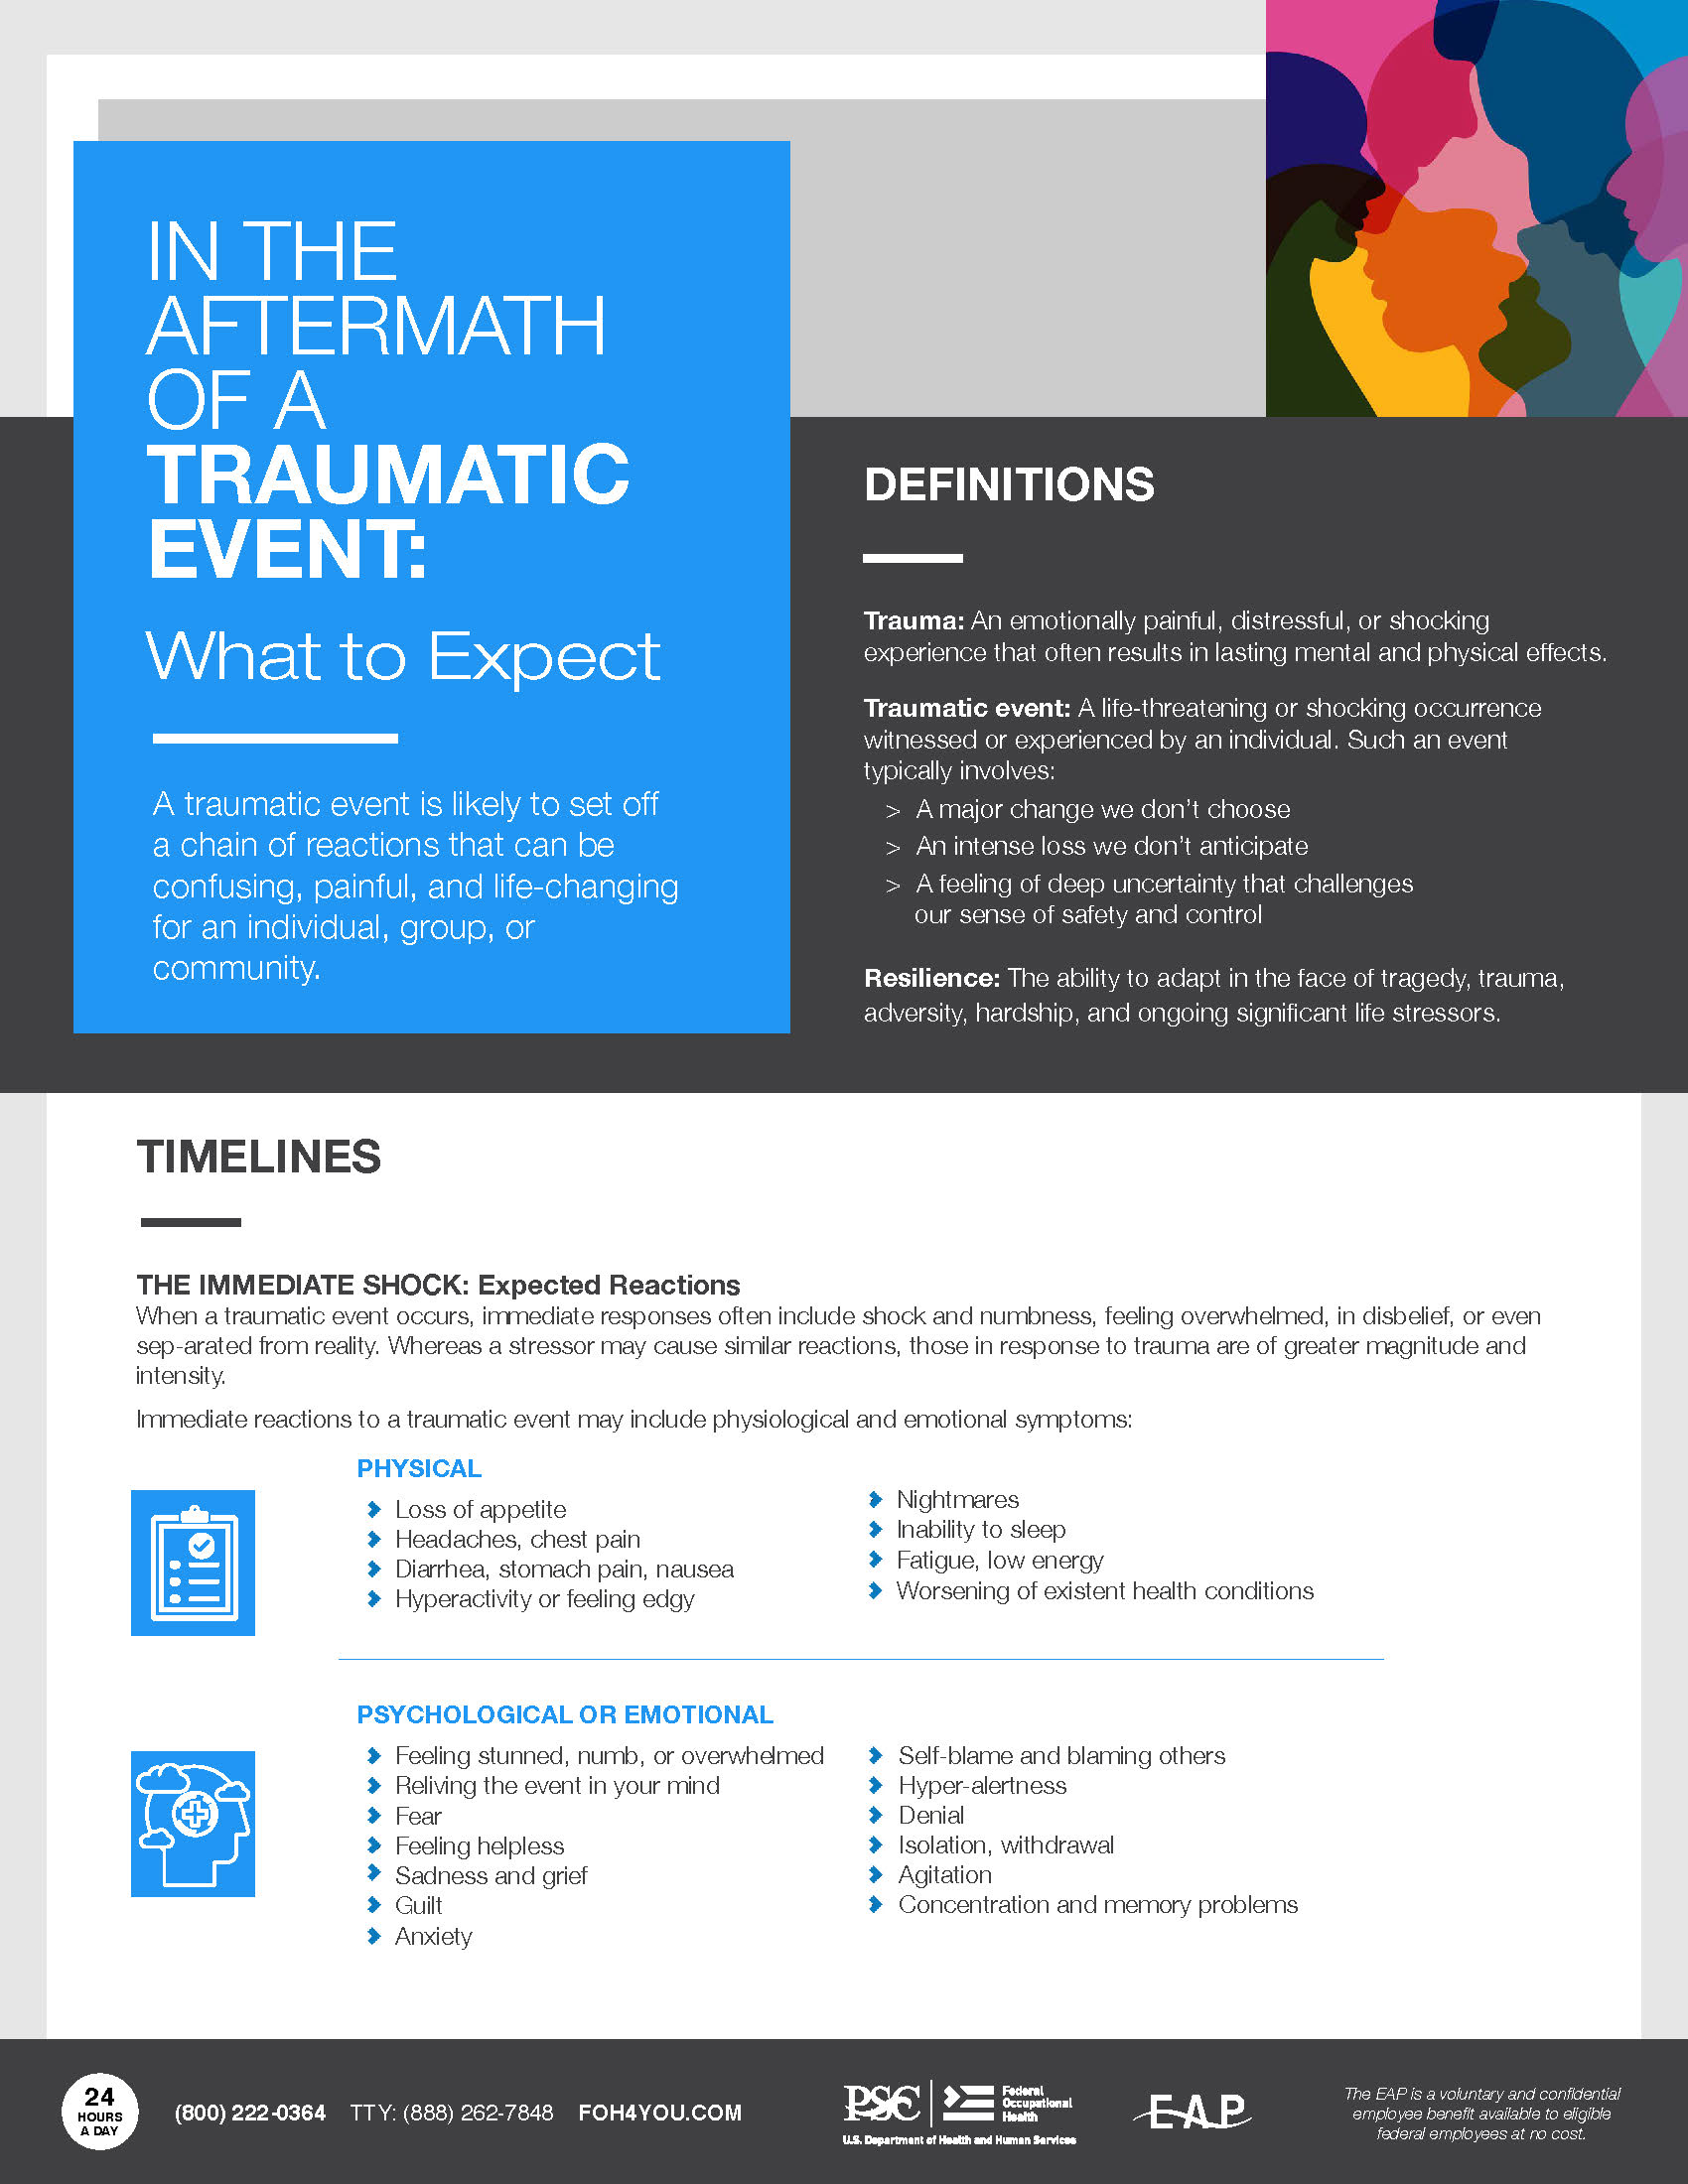 In the Aftermath of a Traumatic Event - What to Expect